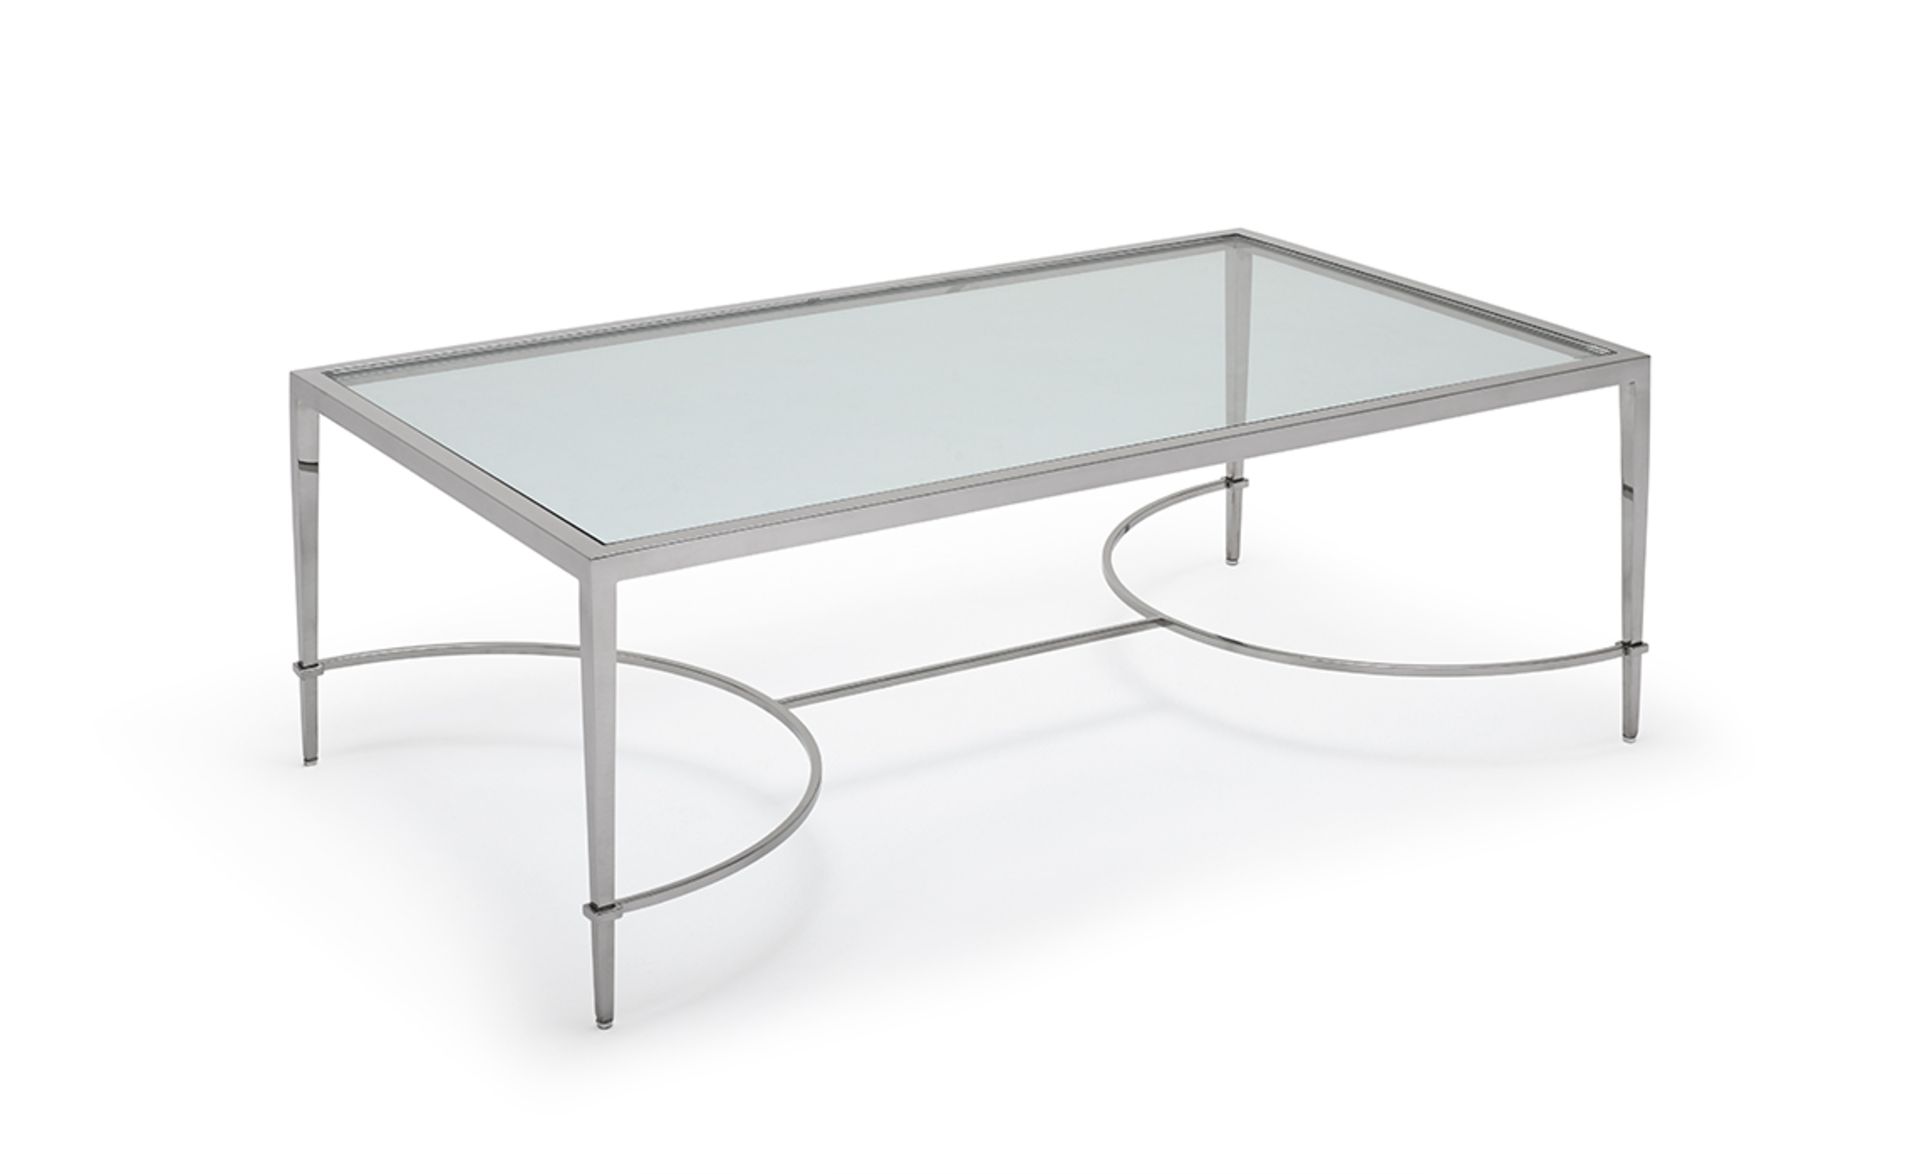 Tokyo Coffee Table by Kesterport The Tokyo coffee table with its clear glass top and a refined - Image 4 of 4